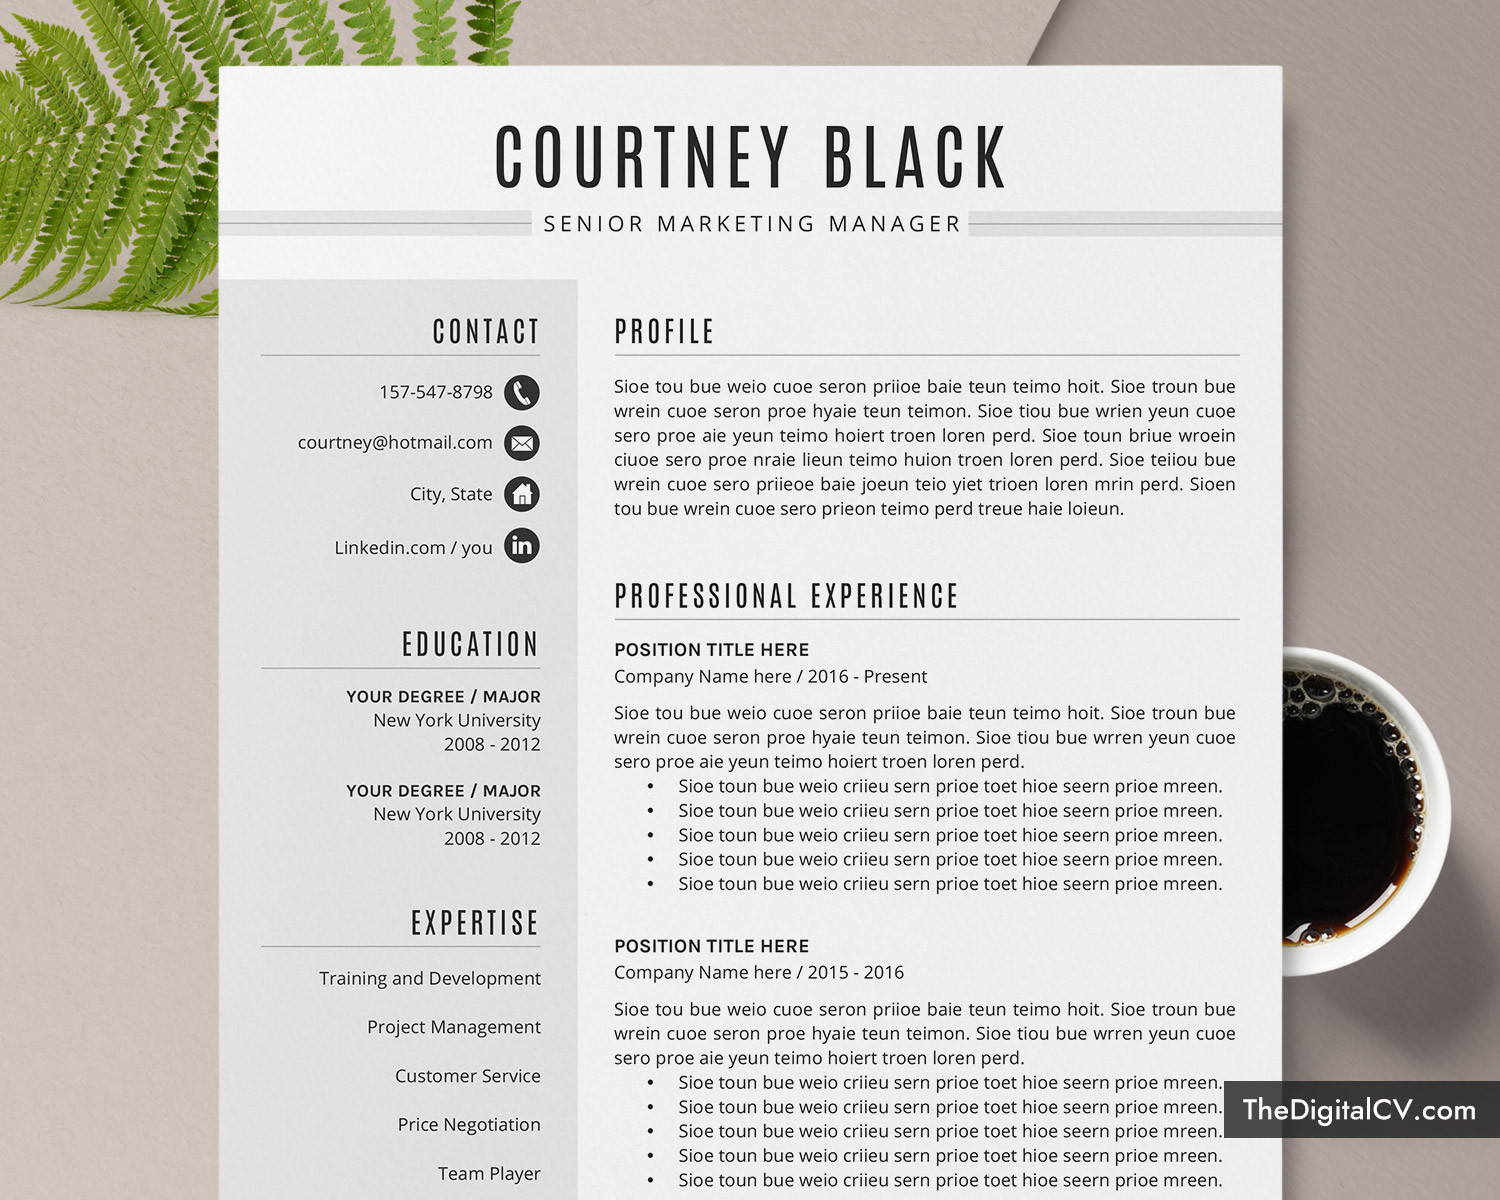 Free Resume Templates 2022 for Fresh Graduates Simple Cv Template for Ms Word, Professional Cv Template, Modern Resume format, First Job Resume, Fresh Graduate Resume Template, Student Resume …